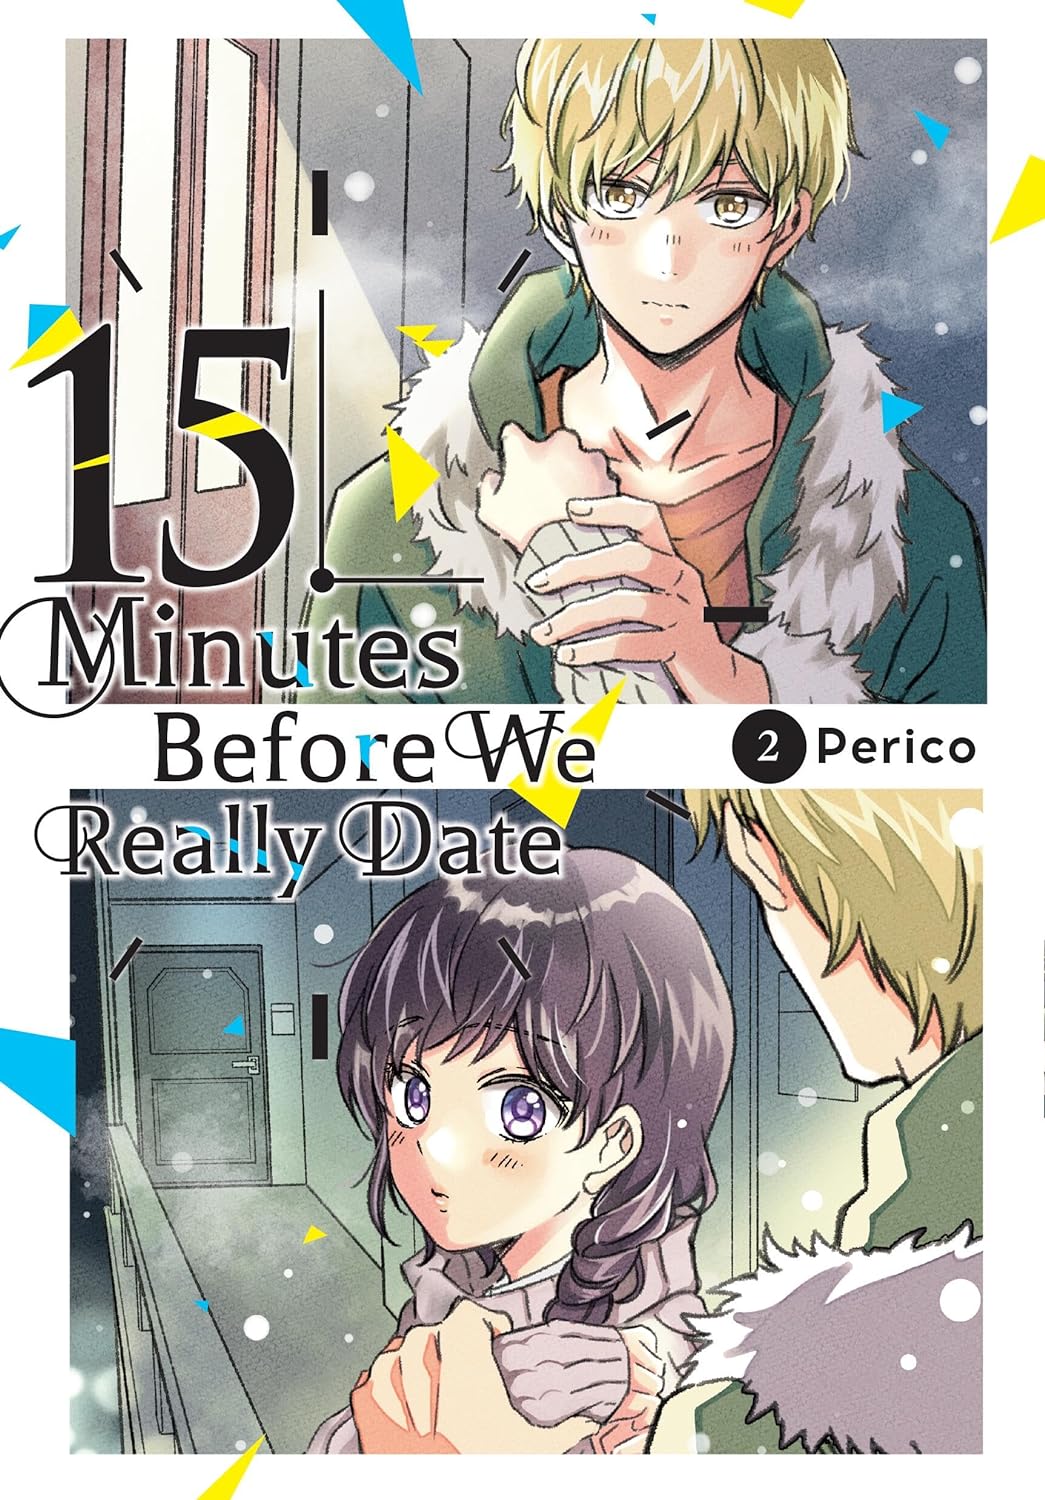 15 Minutes Before We Really Date Vol. 02